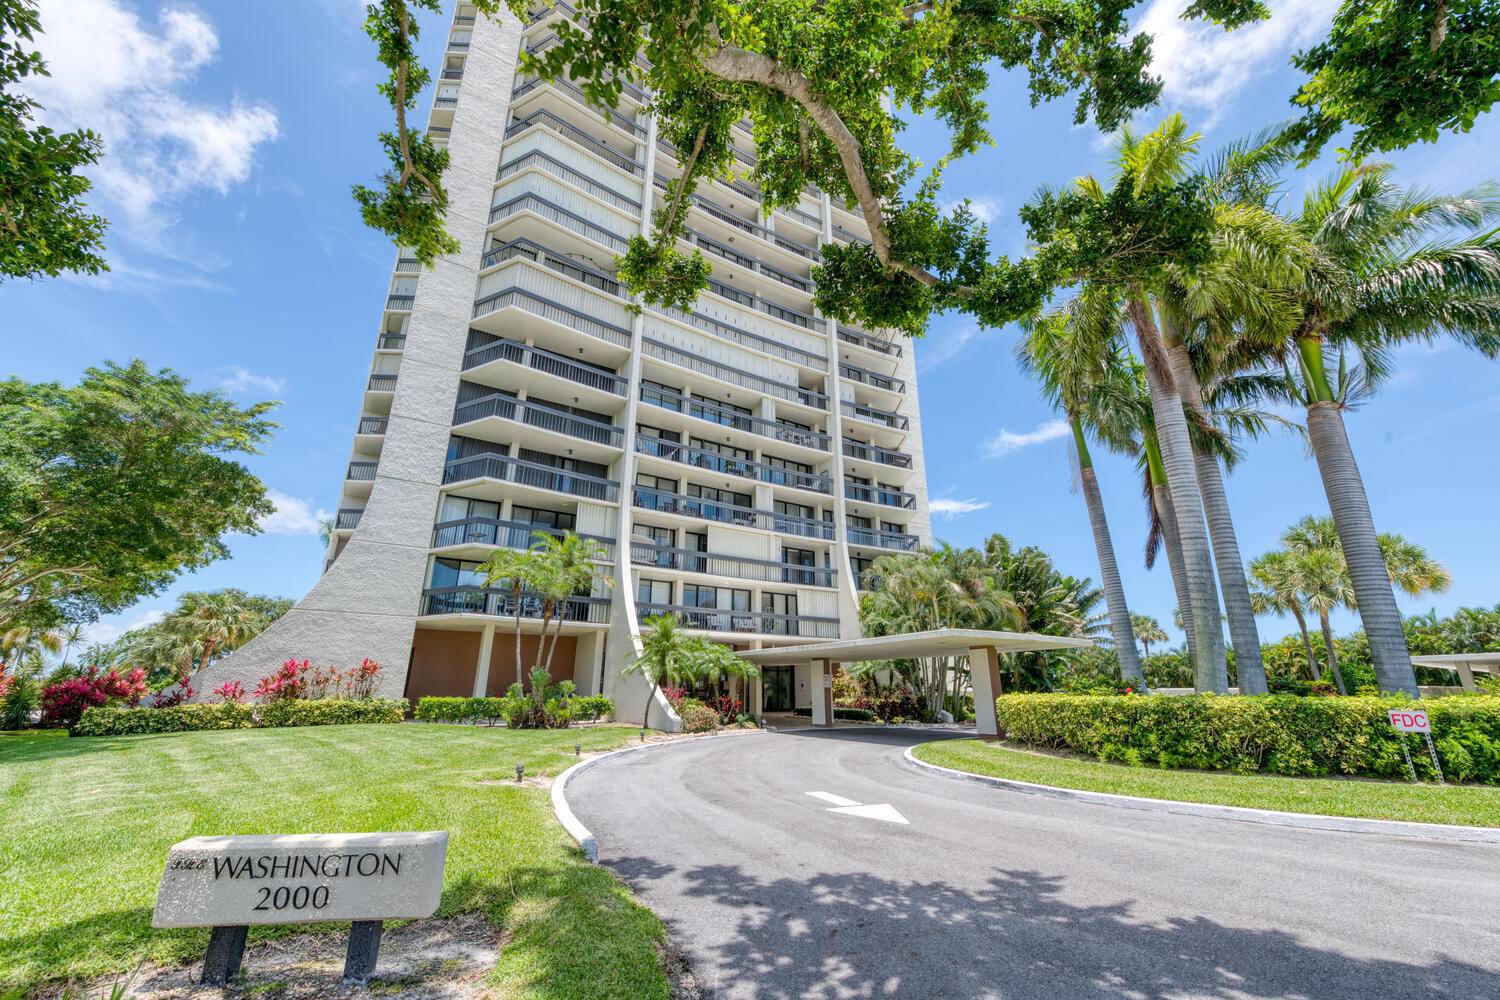 Enjoy this bright fully furnished open 2 bedroom 2 bath corner unit with 2 balconies for plenty of outdoor living in the prestigious gated community of Lands of the President.